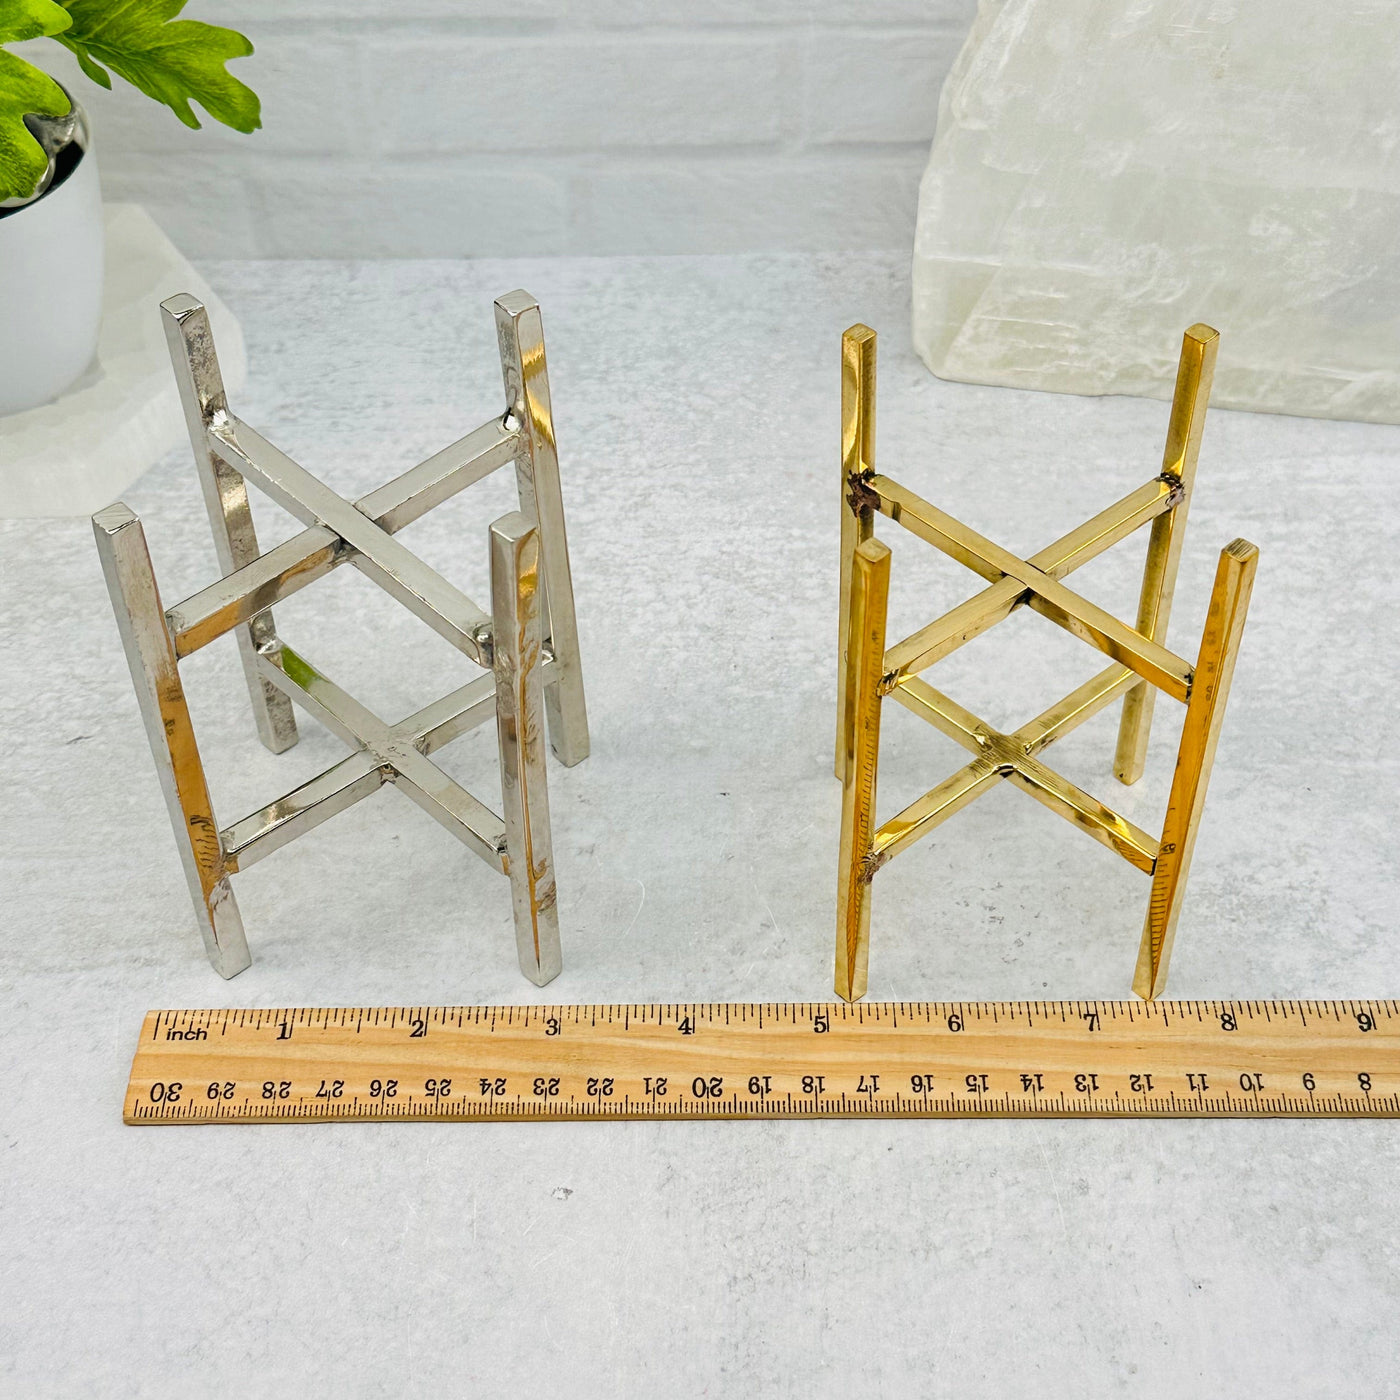 Crystal Sphere Stand - 4 Legged - Choose Gold Brass or Silver Aluminum next to a ruler for size reference 